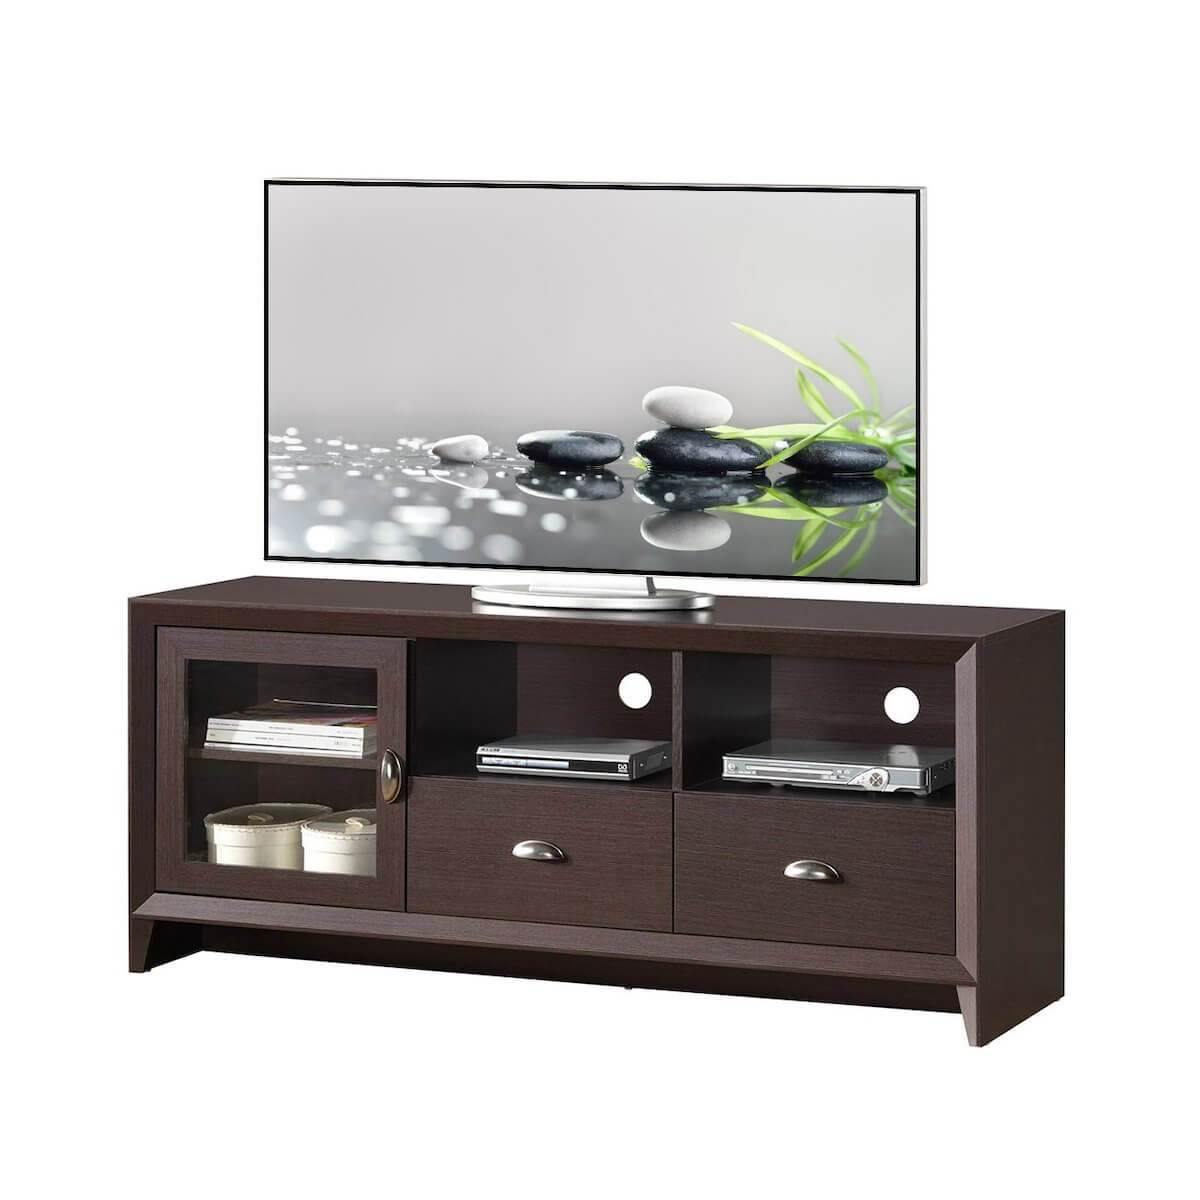 Techni Mobili Wenge Modern TV Stand with Storage for TVs Up To 60" RTA-8807-WN with Computer